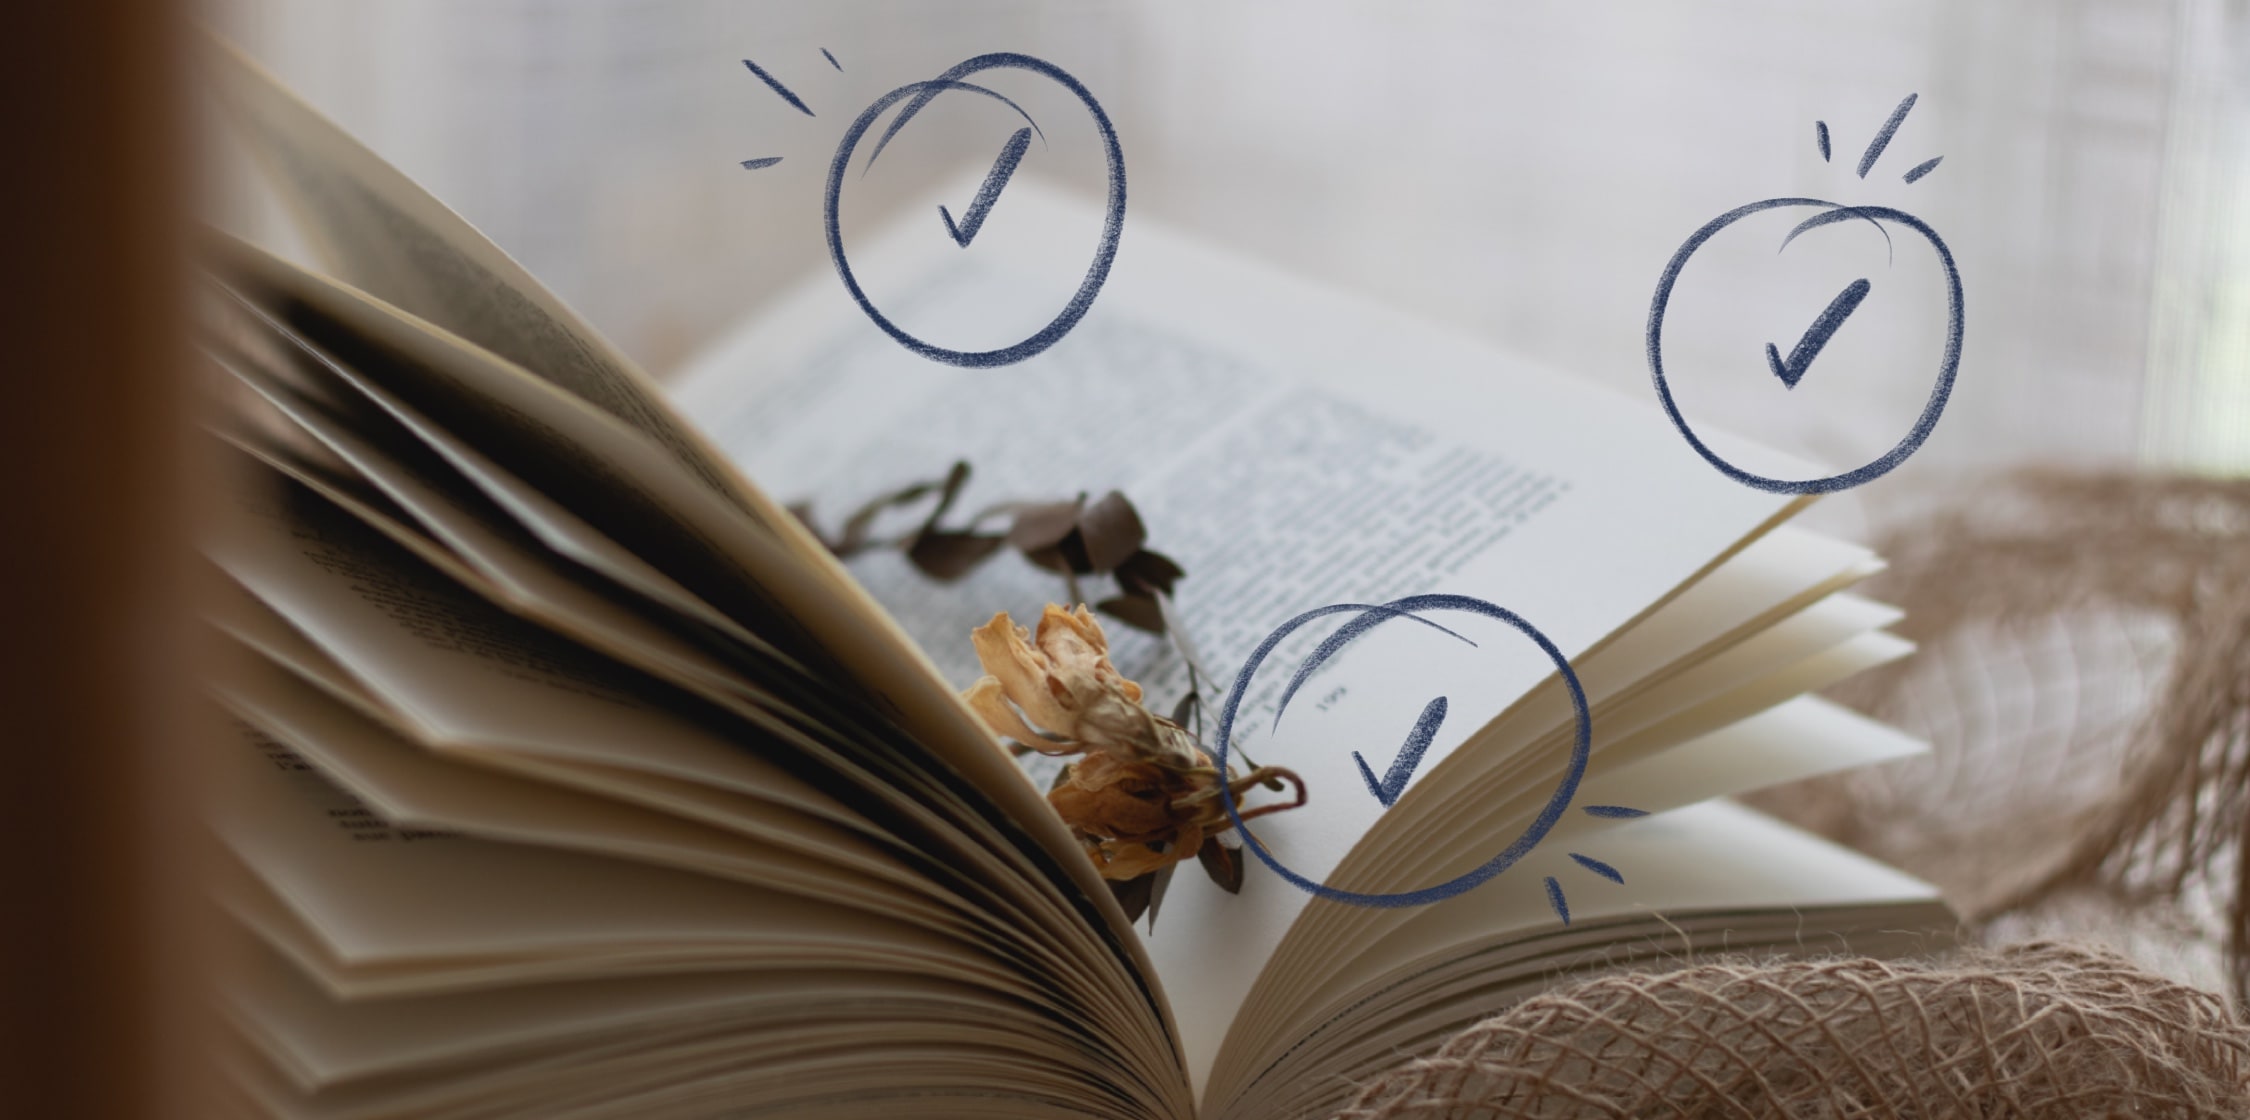 How To Print Your Own Book: 3 Places To Self Publish a Book - Shopify USA